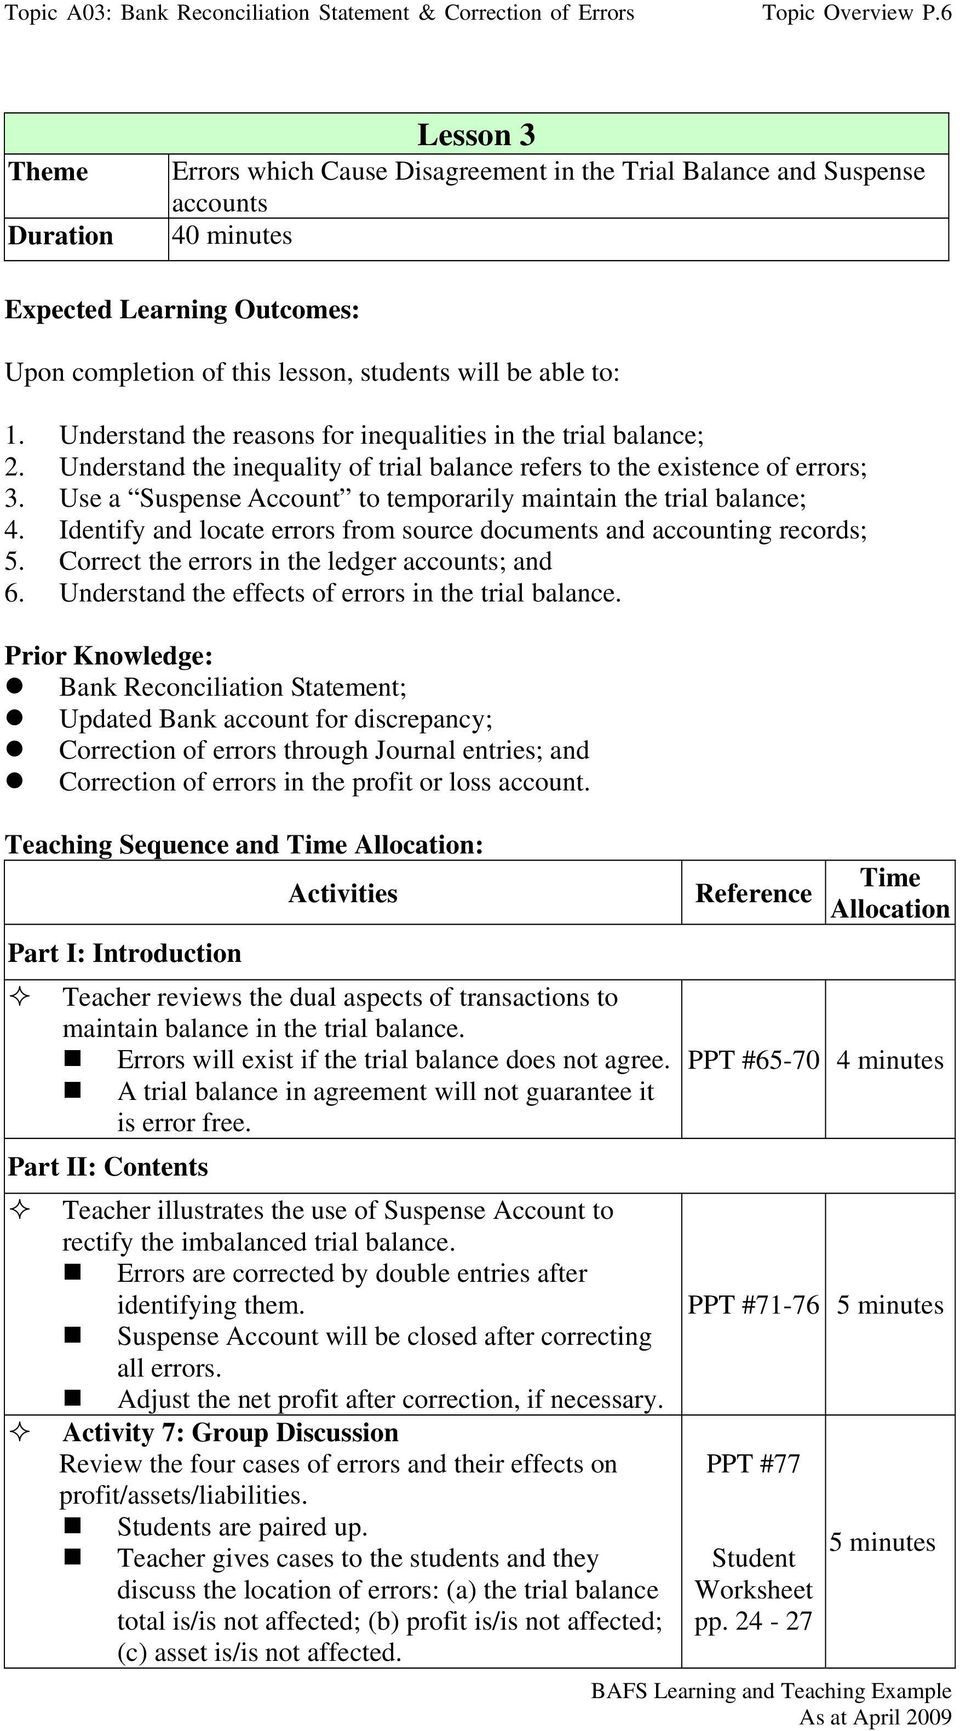 Reconciling An Account Worksheet Answers